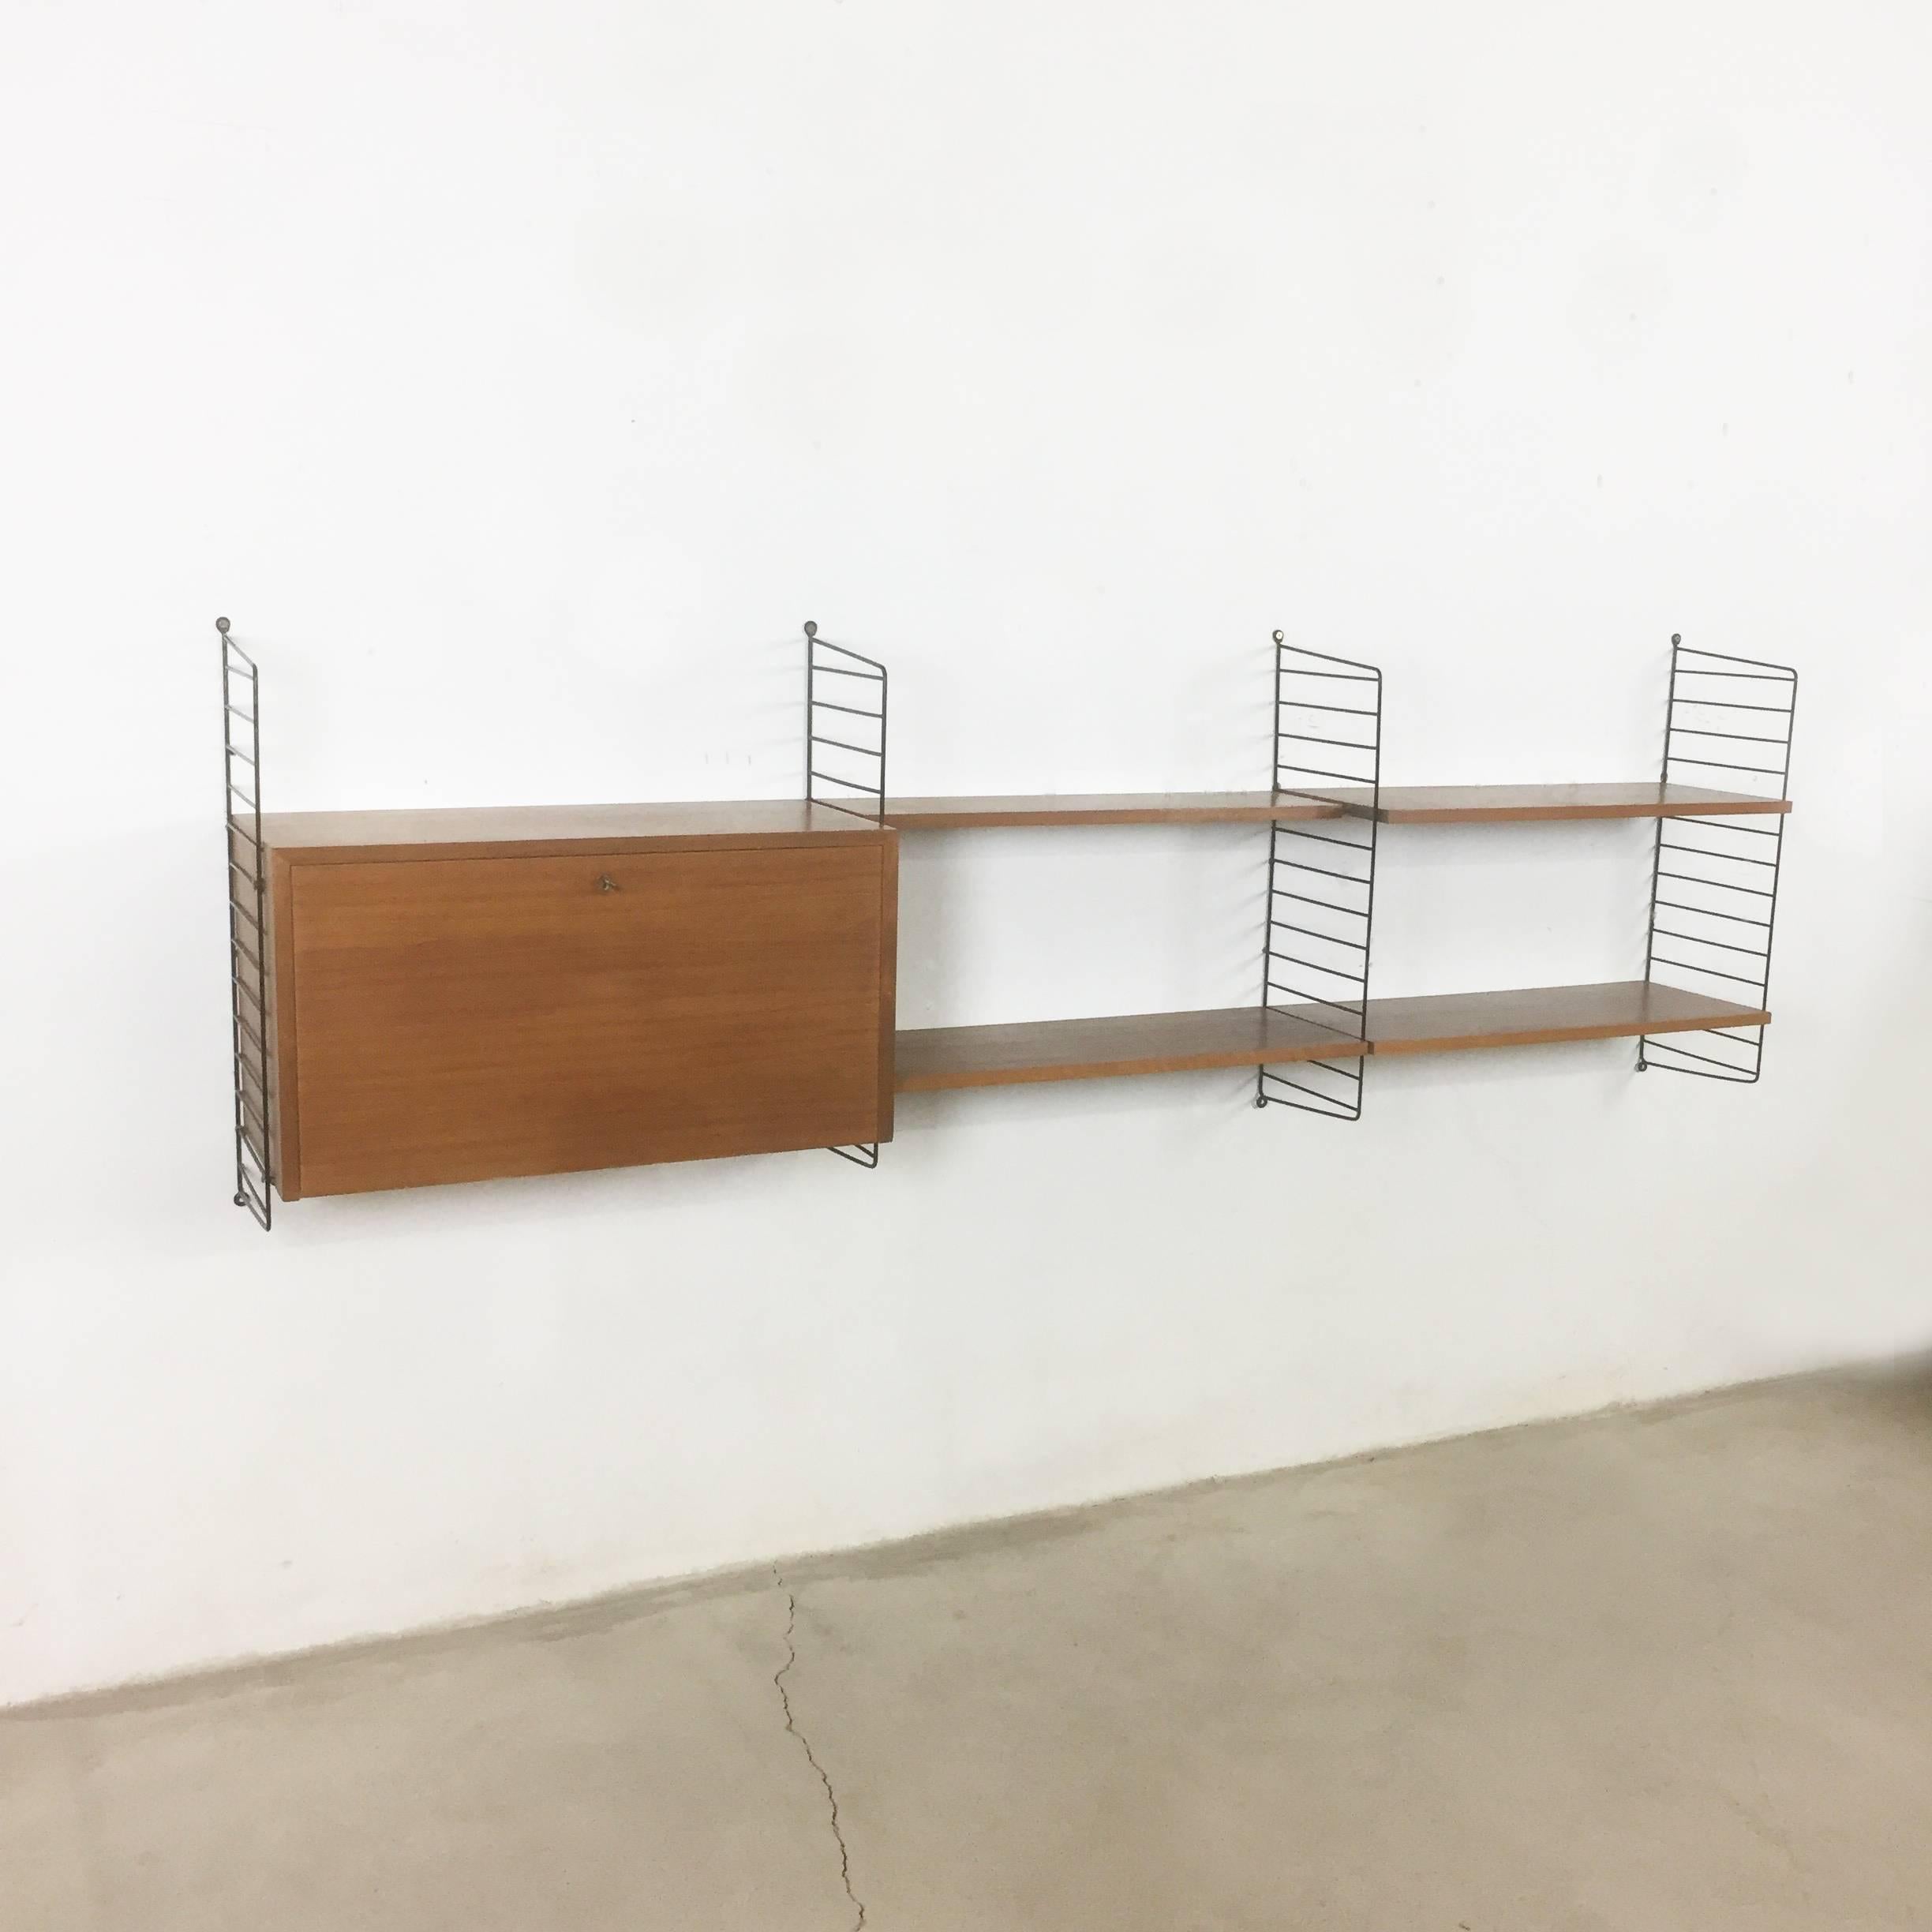 String Regal wall unit

Made in Sweden

Bokhyllan 'The Ladder Shelf’

Design: Nils und Kajsa Strinning, 1949

The architect Nisse Strinning was born in 1917. From 1940-1947 he studied architecture in Stockholm, before he designed the legendary